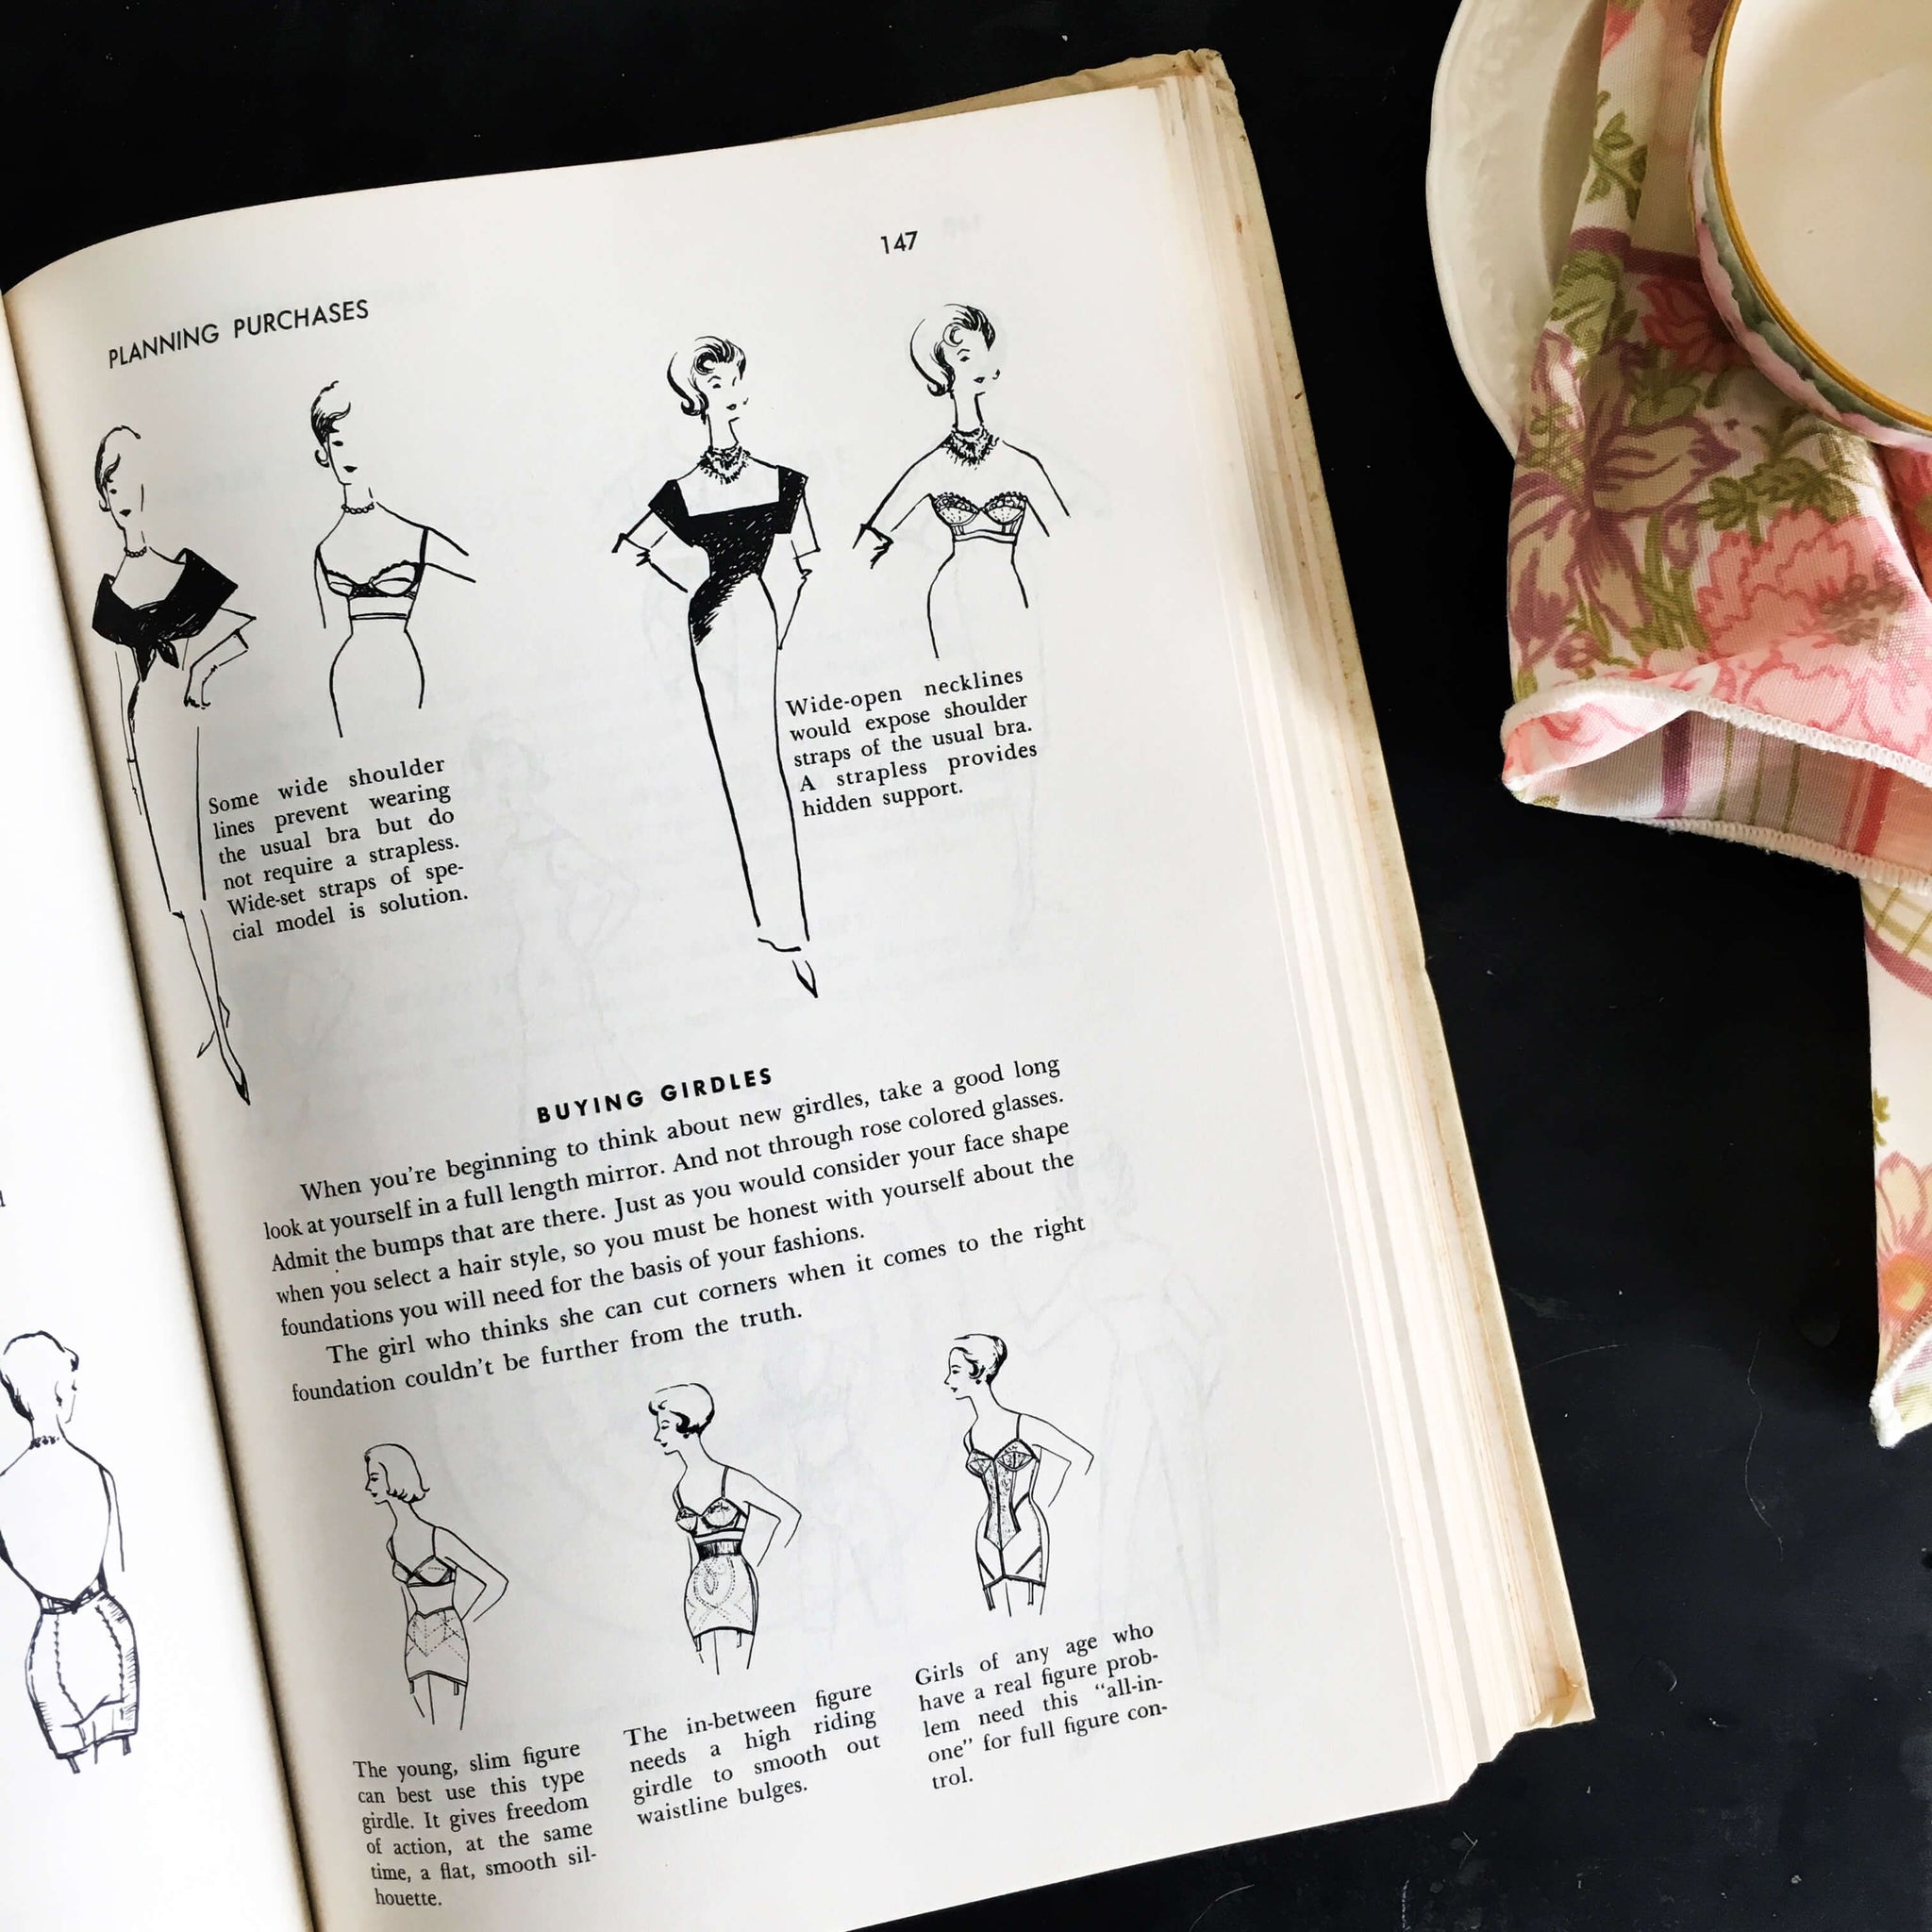 how to buy girdles 1960s style